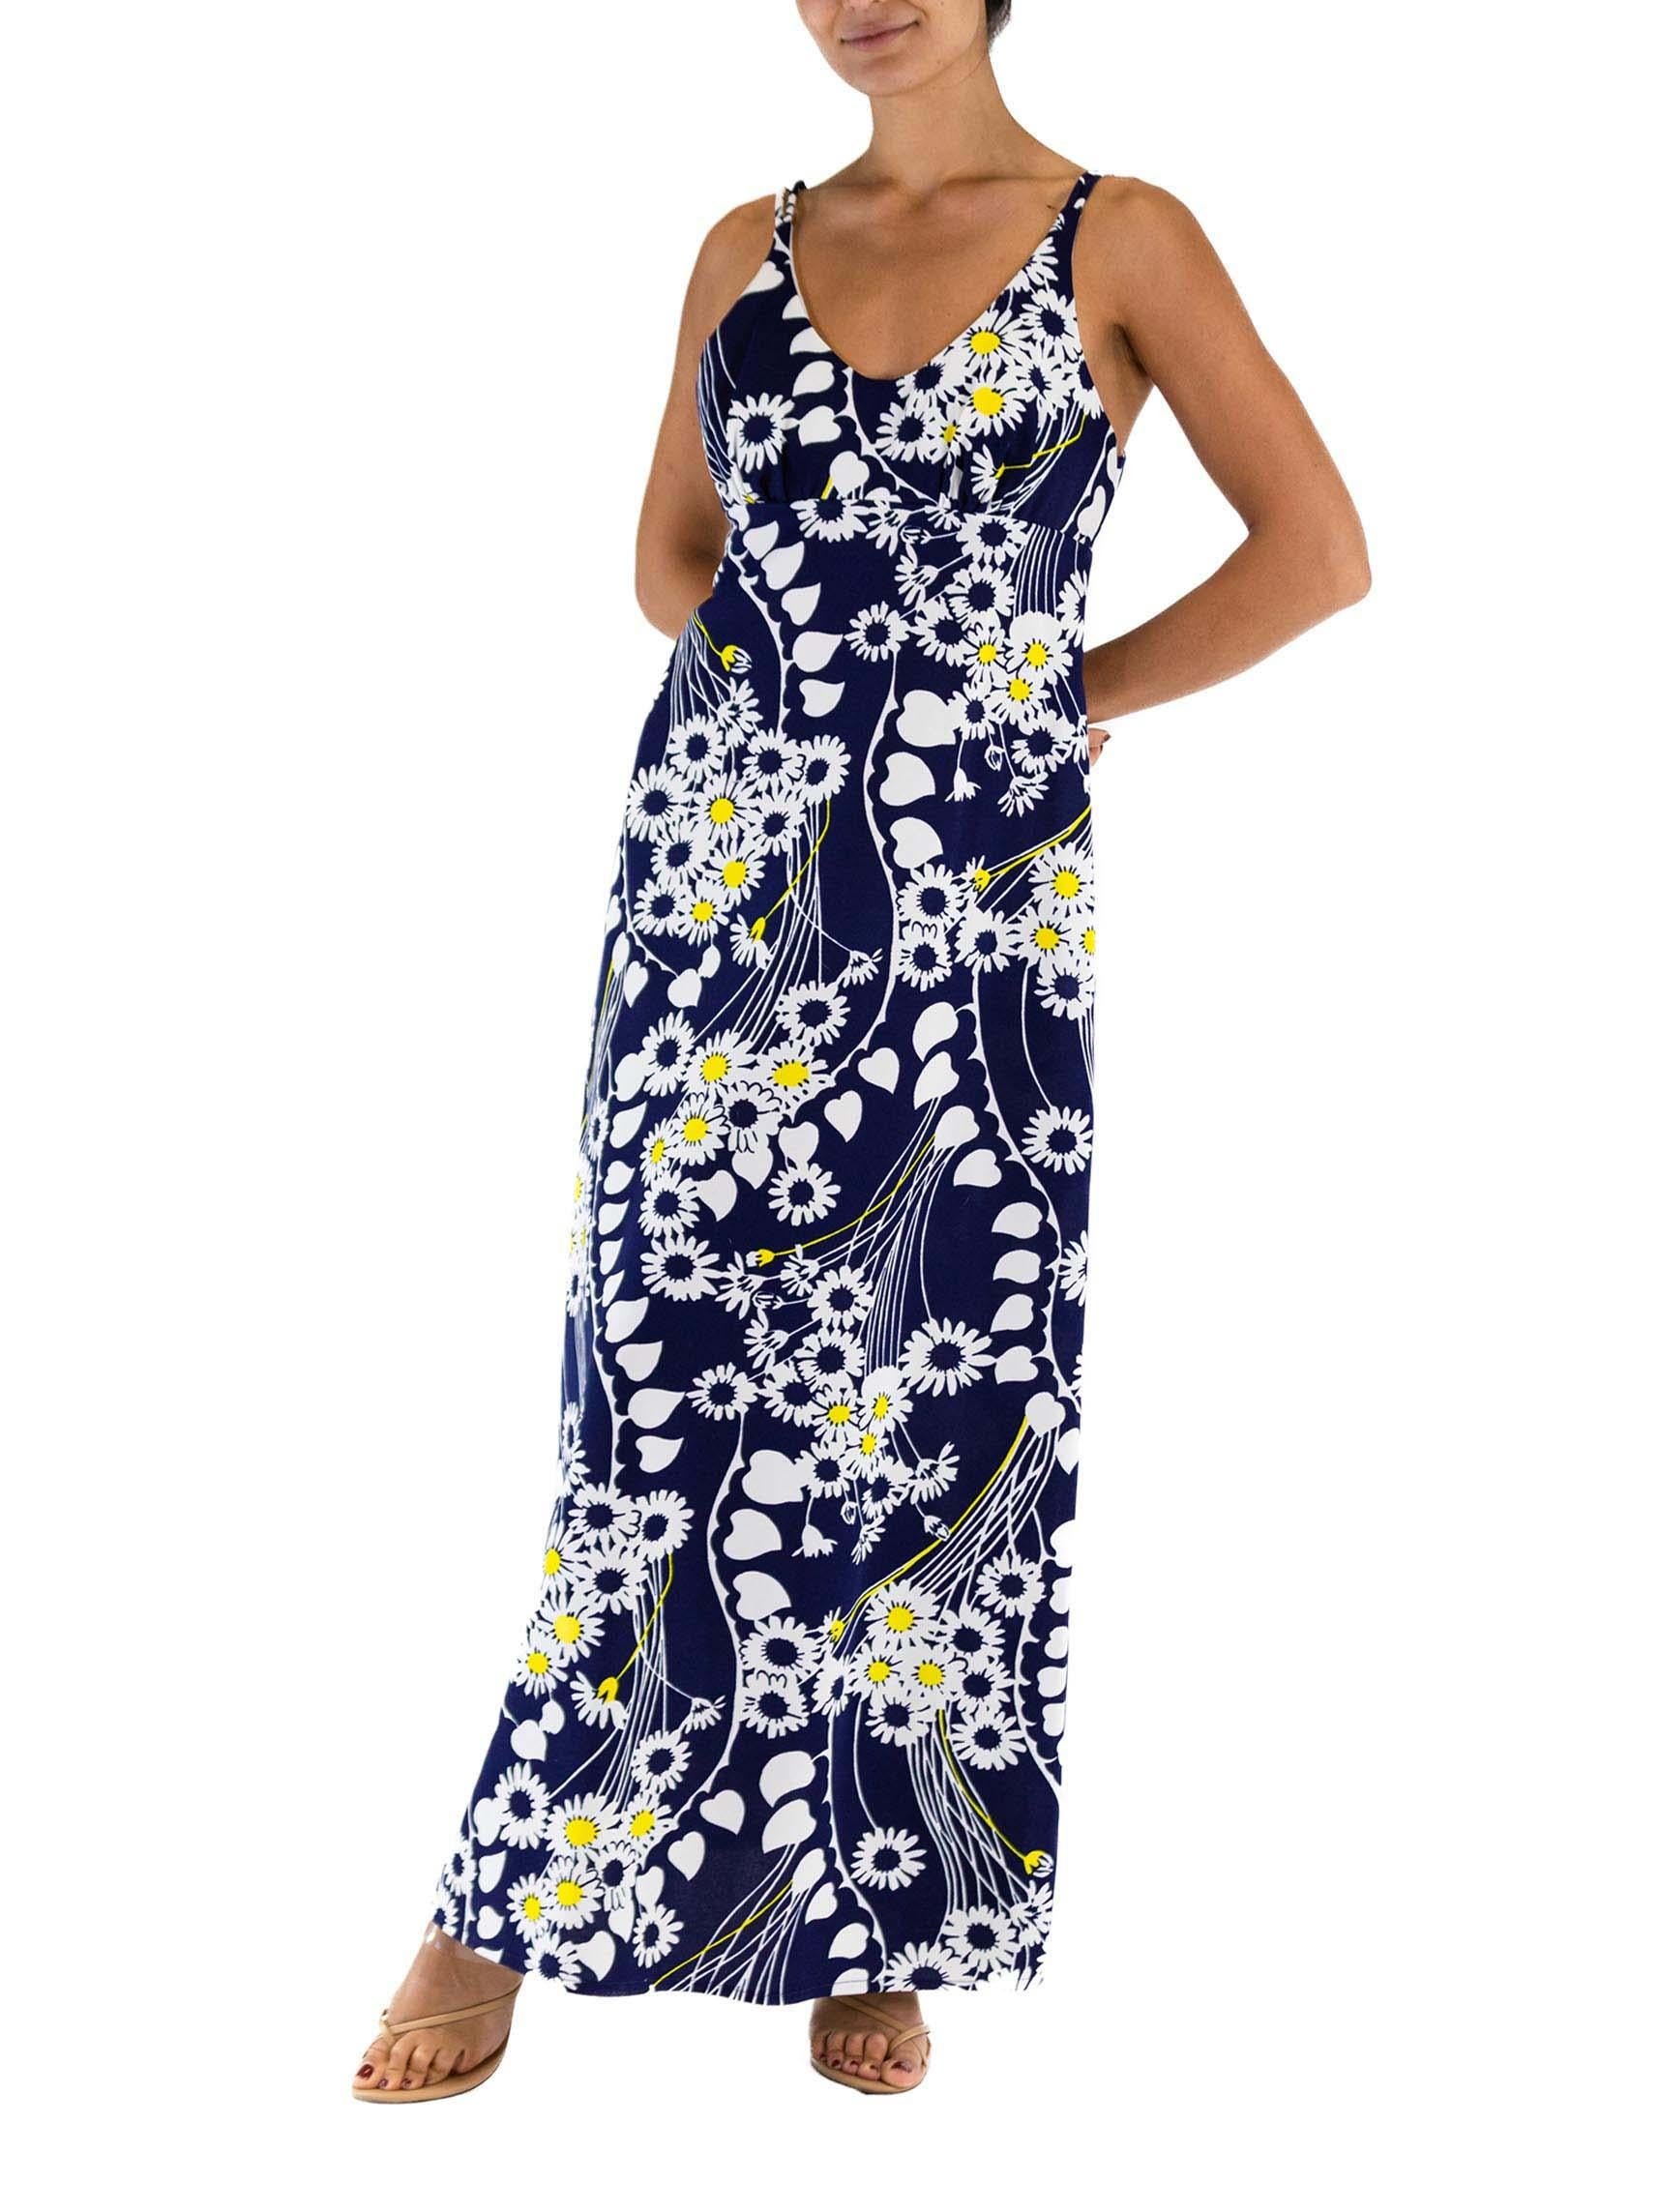 1970s Navy Blue Polyester Jersey White & Yellow Mod Floral Maxi Dress For Sale 2